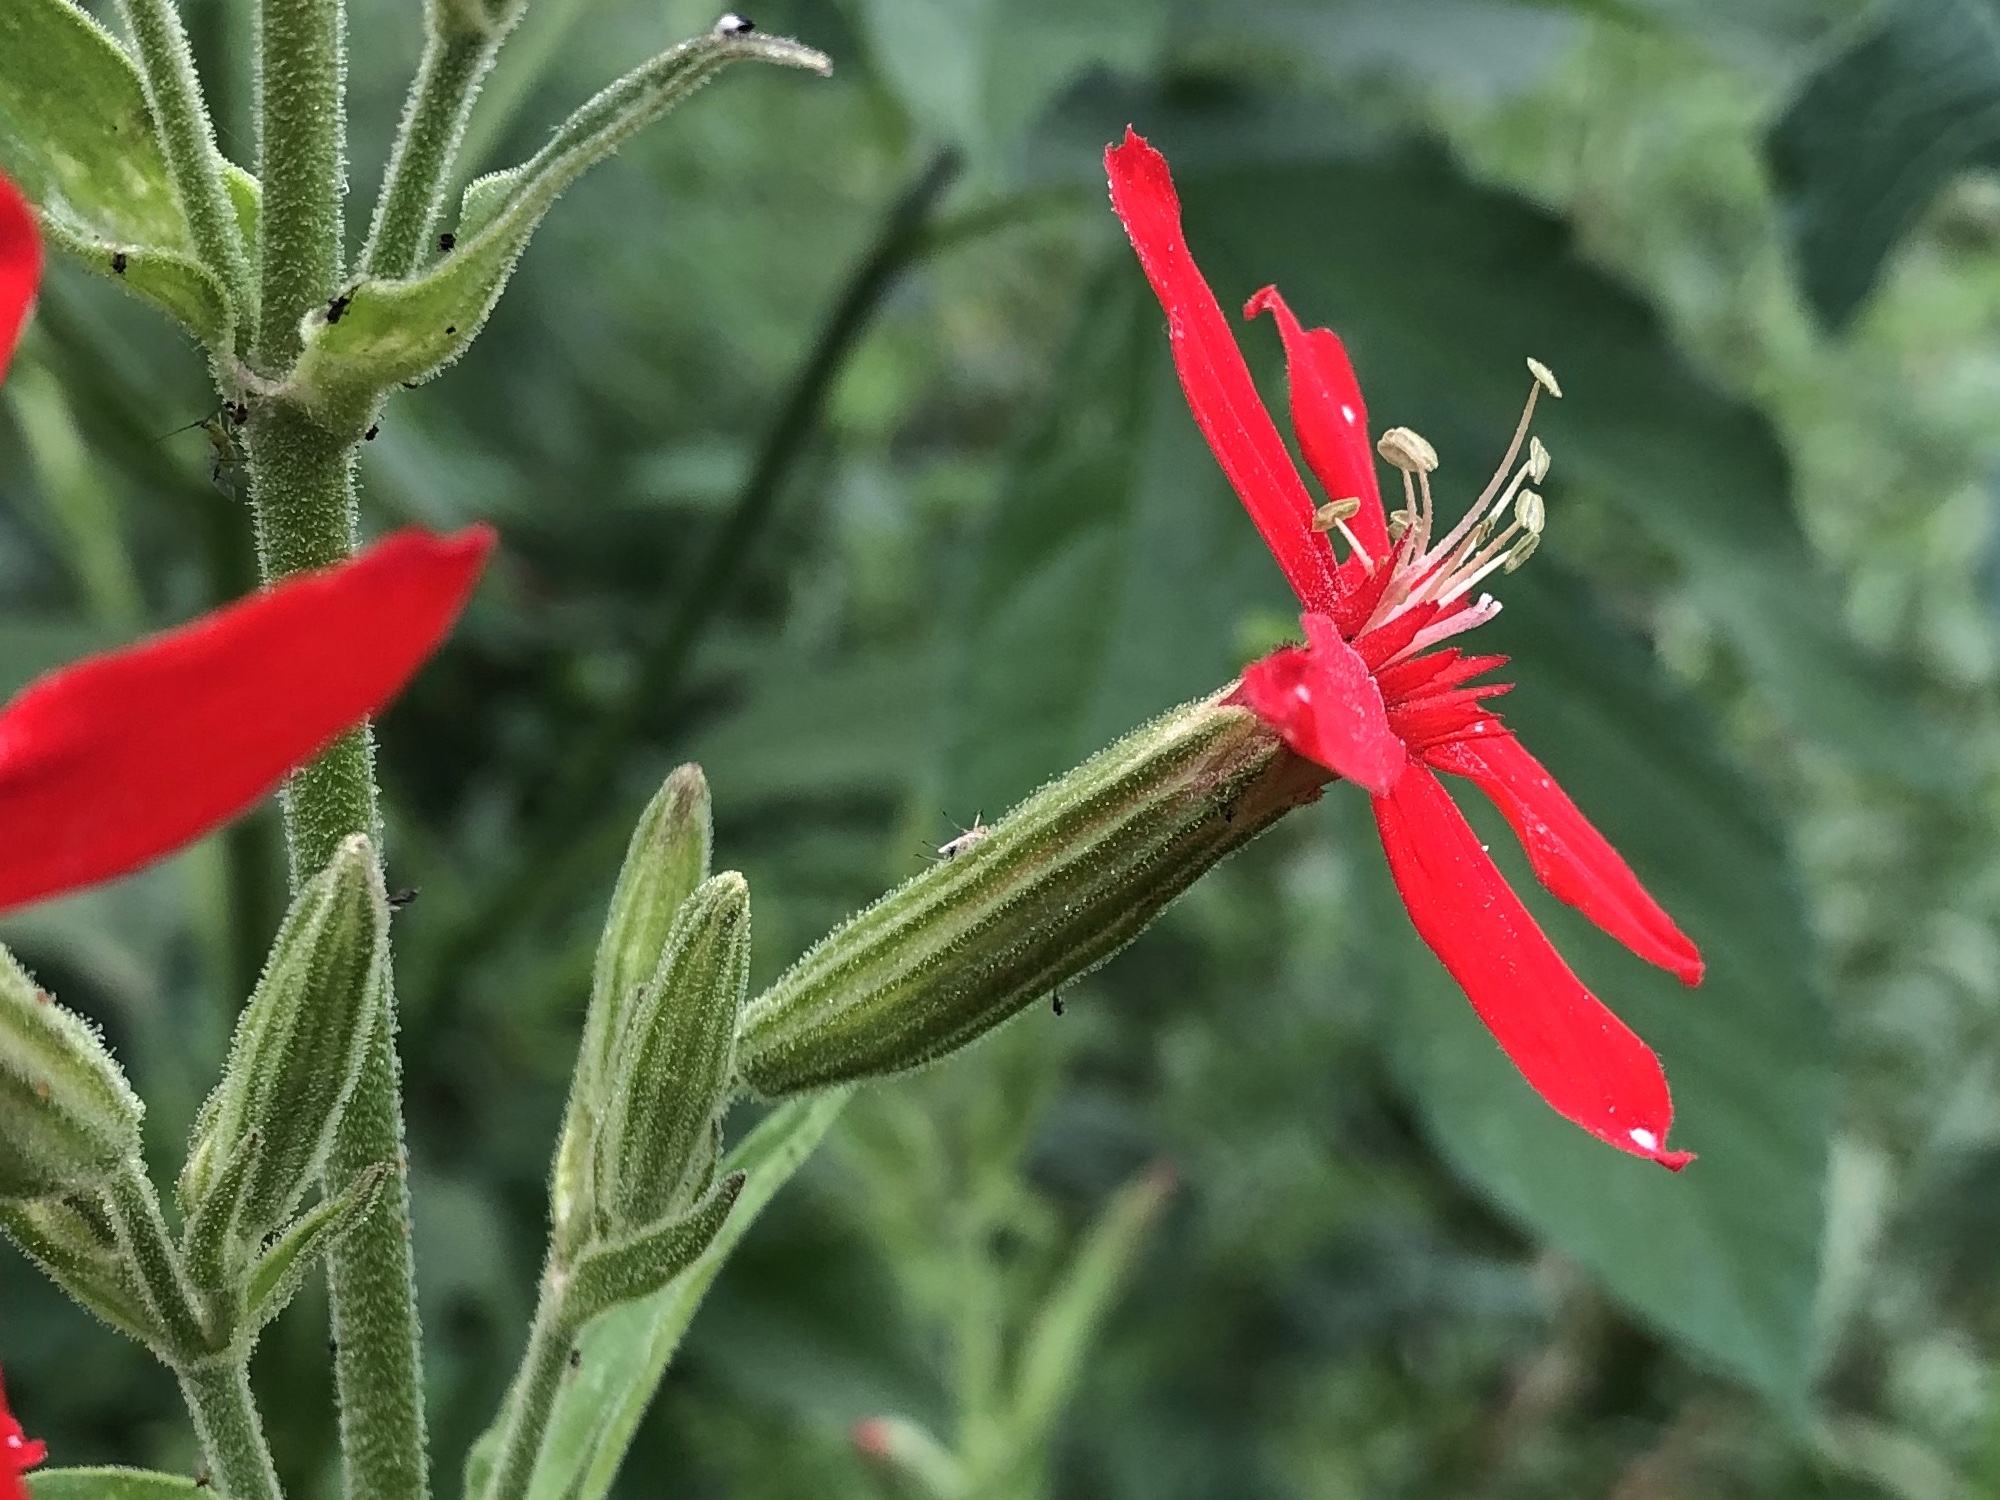 Royal Catchfly in wildflower garden along bike path at Glenway Street intersection in Madison, Wisconsin on July 19, 2022.